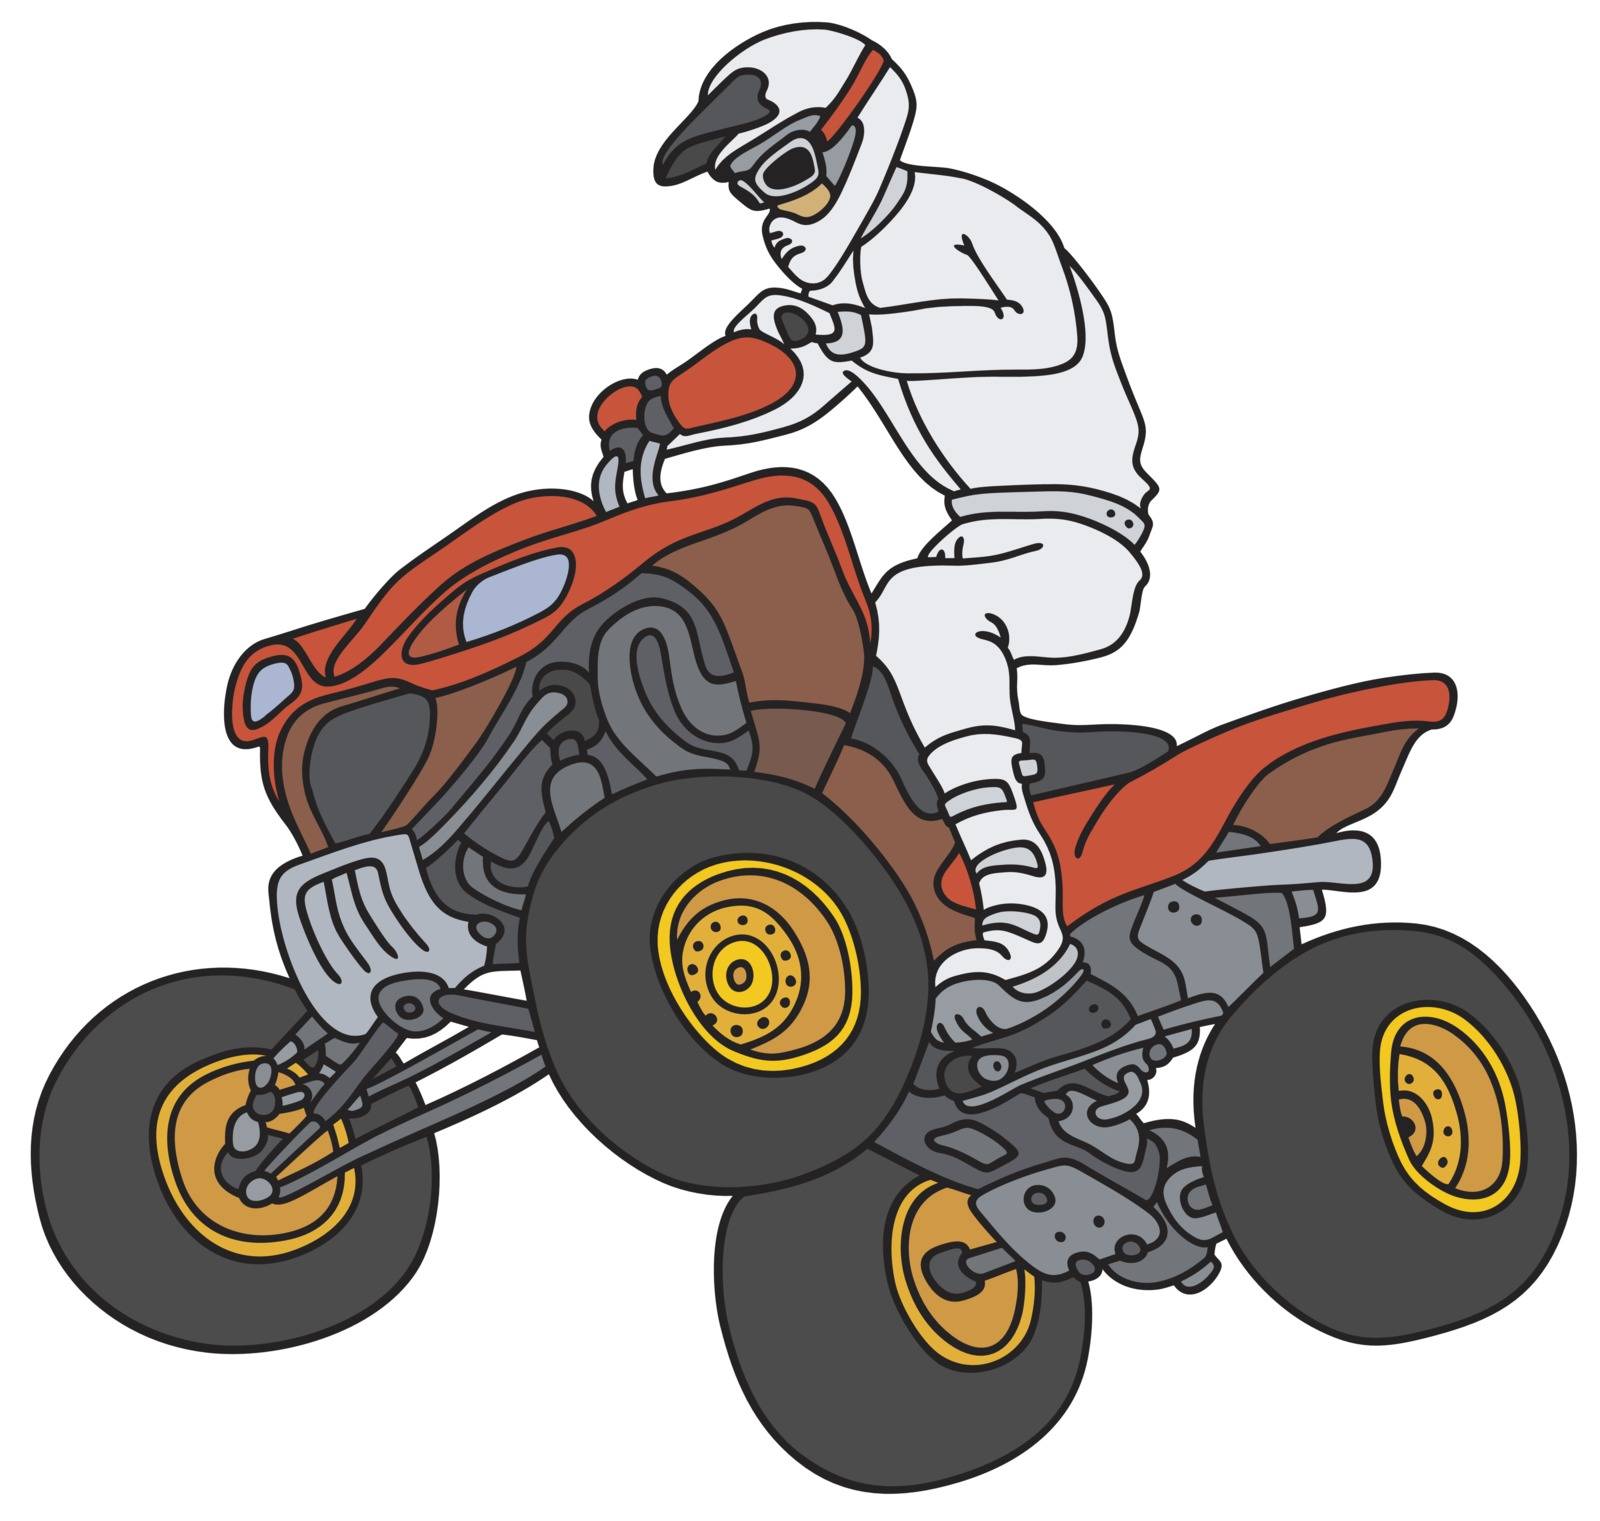 Hand drawing of a racer on the red all terrain vehicle - not a real model